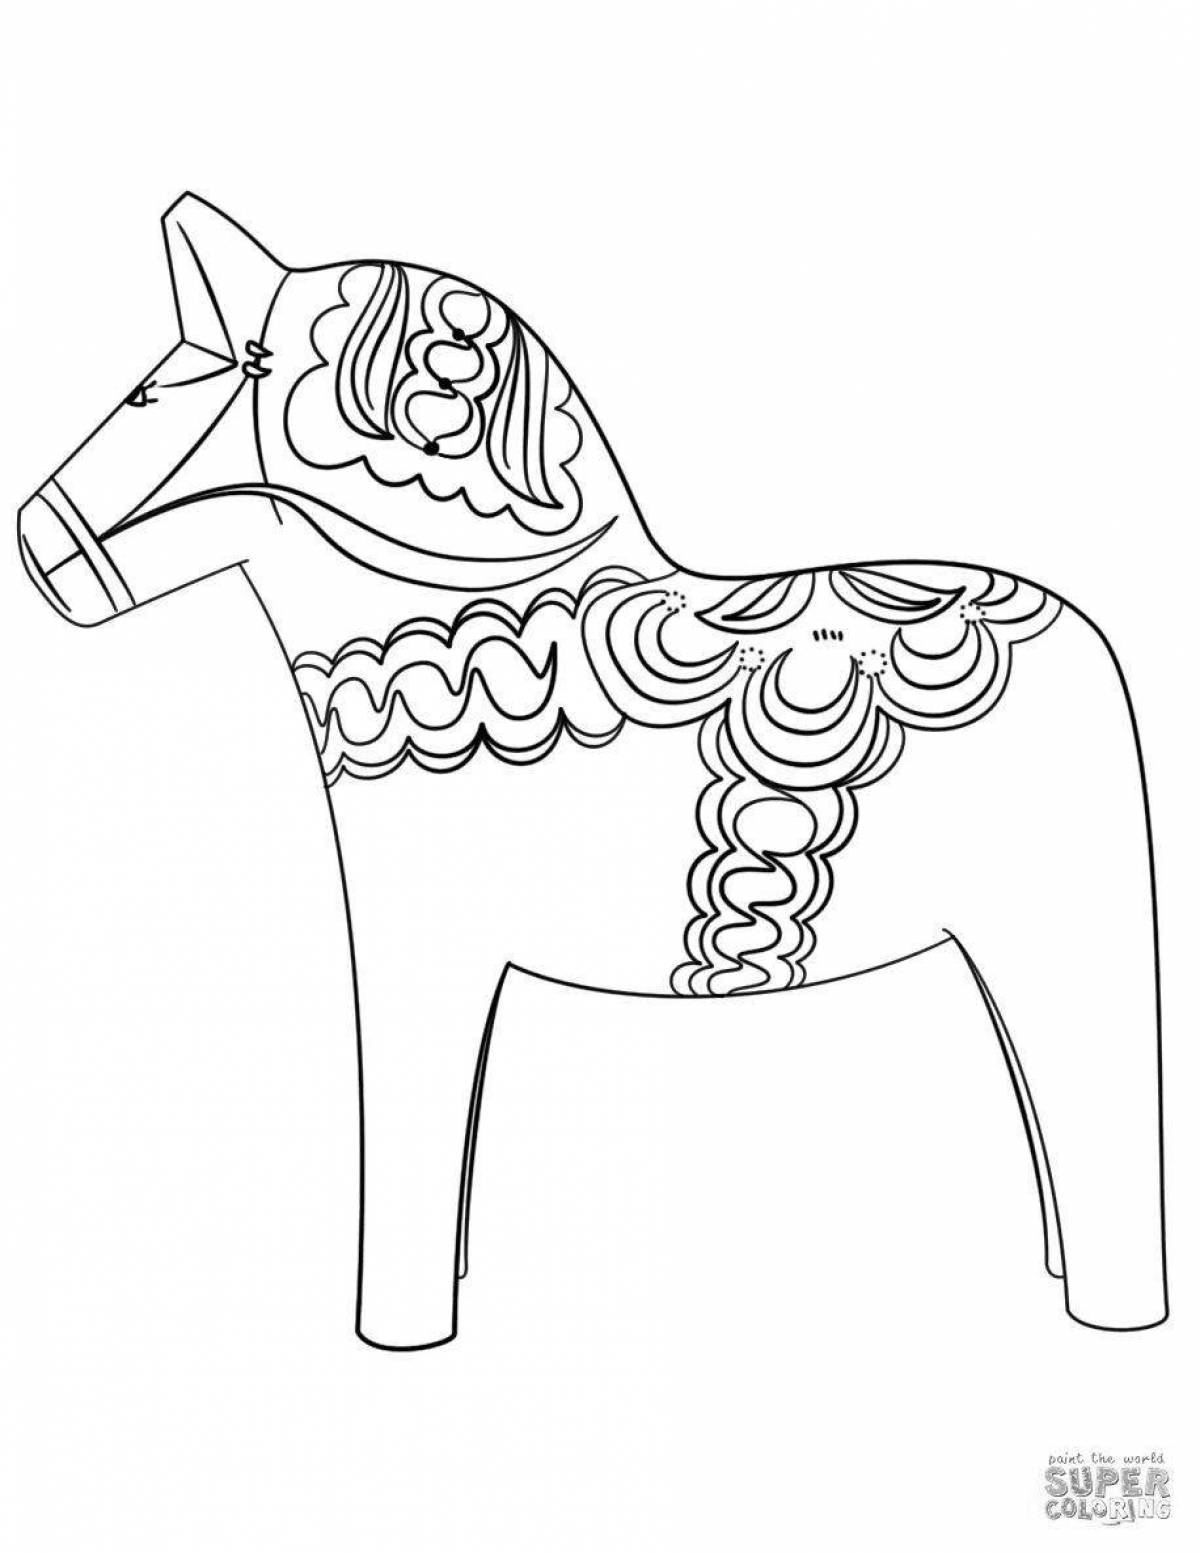 Exotic horse coloring page